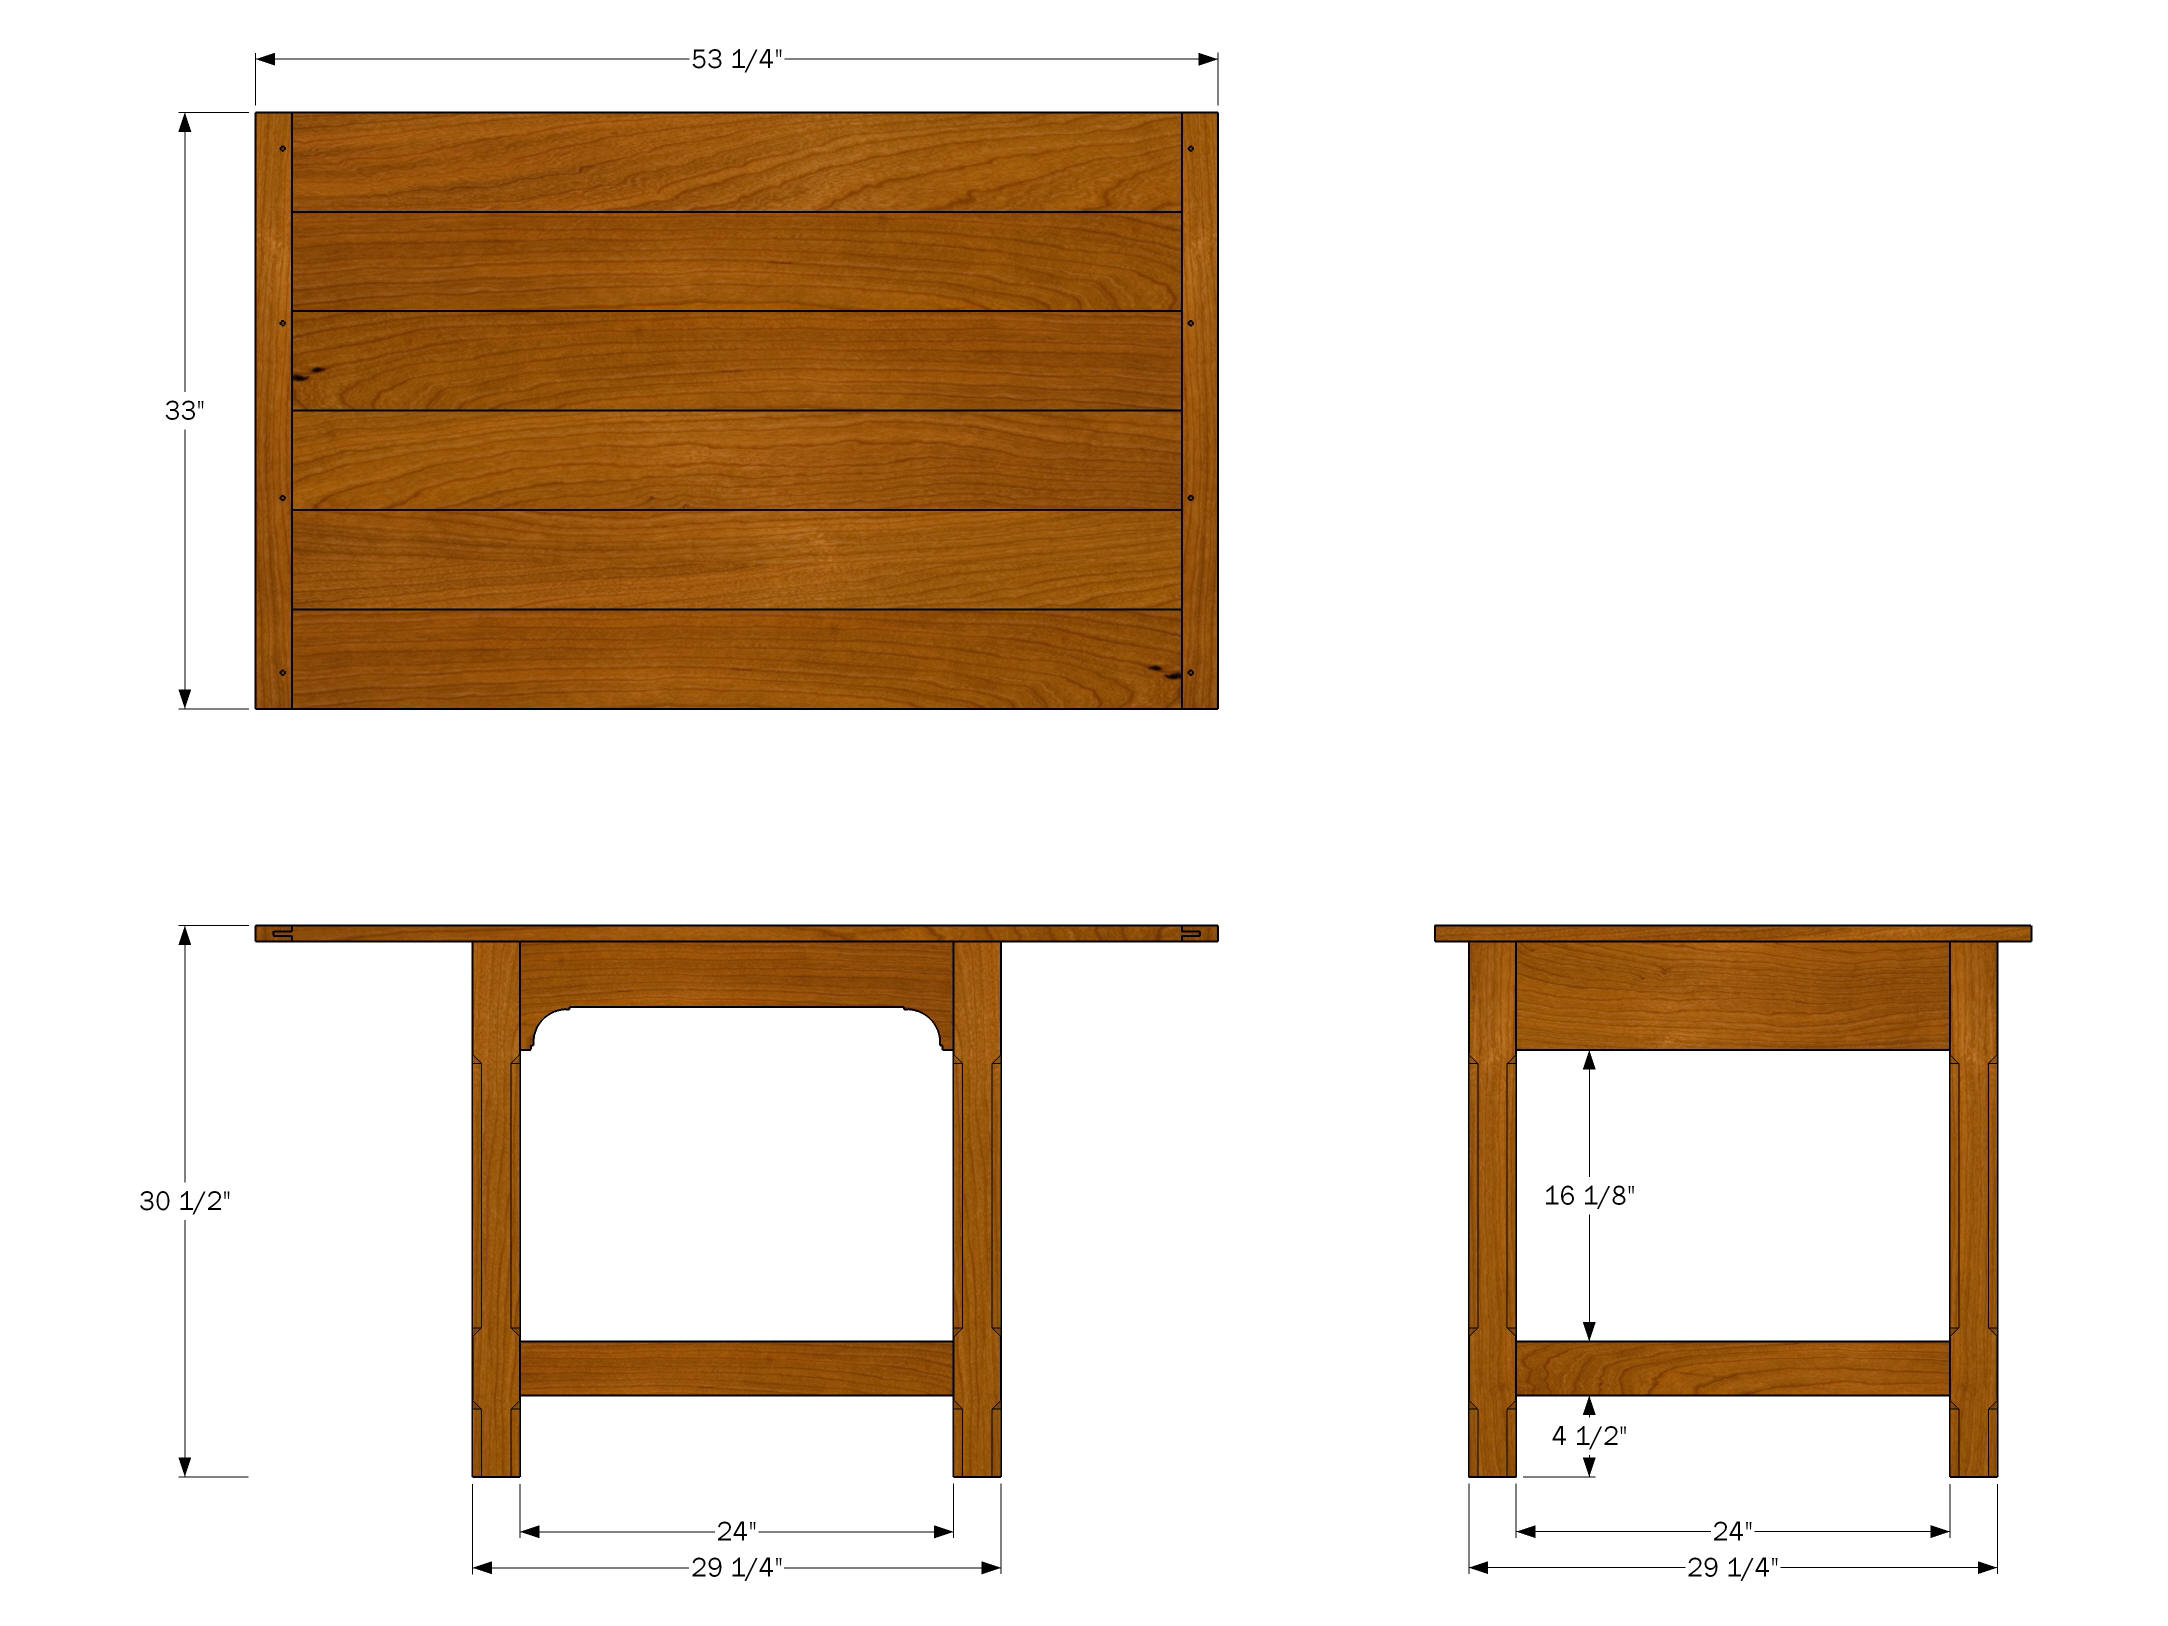 Apartment Dining Table Plan: Orthographic Views | Jeff ...